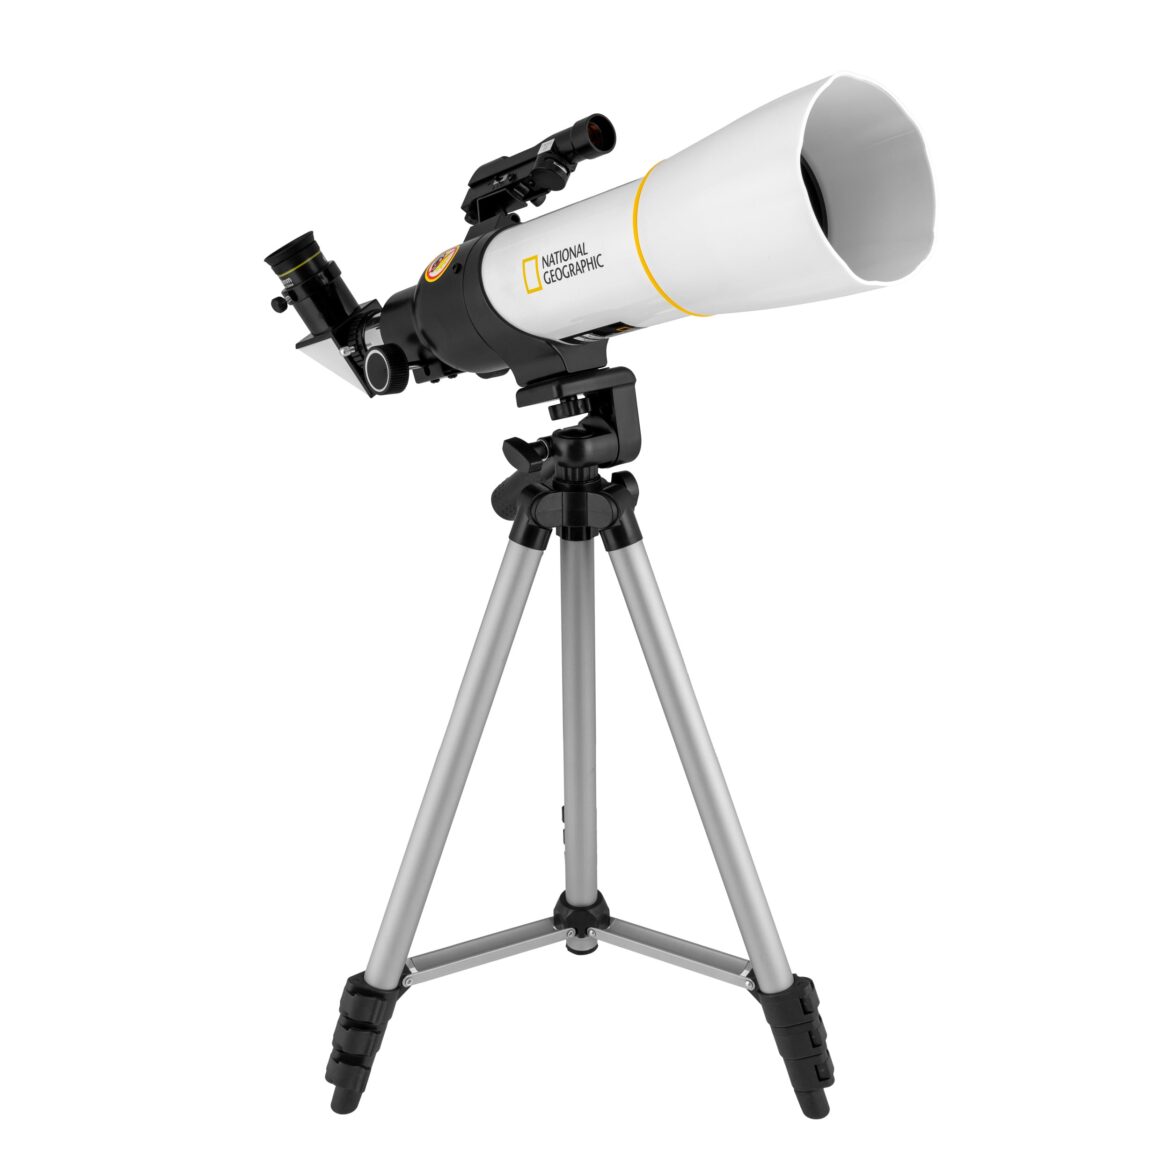 National Geographic RT70400 – 70mm Refractor Telescope with Panhandle Mount